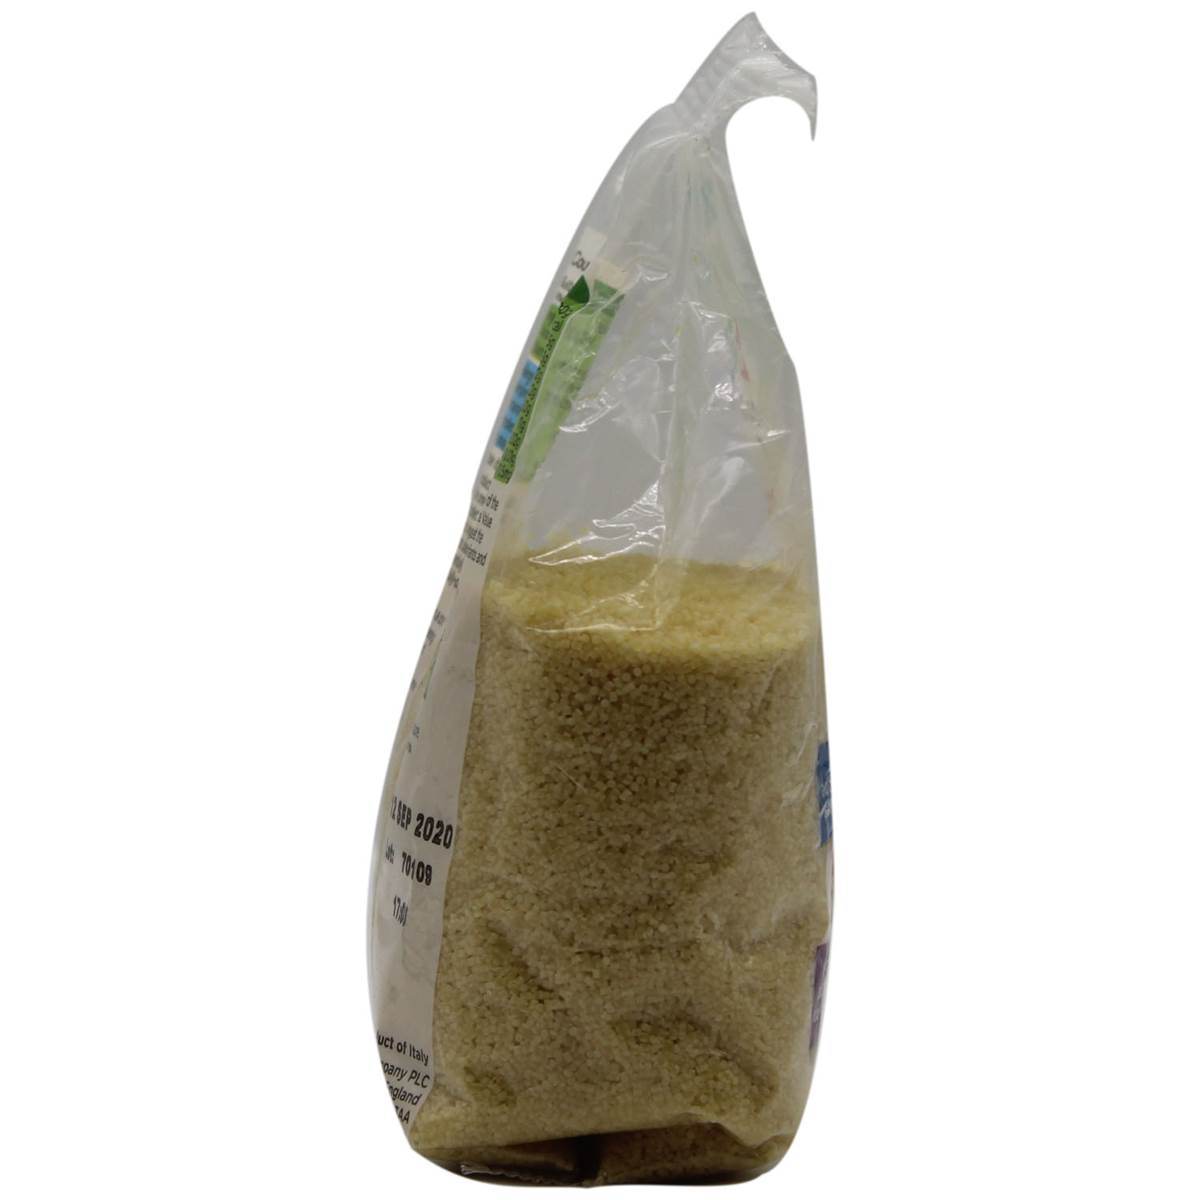 Boots Baby Organic Cous Cous - 250g